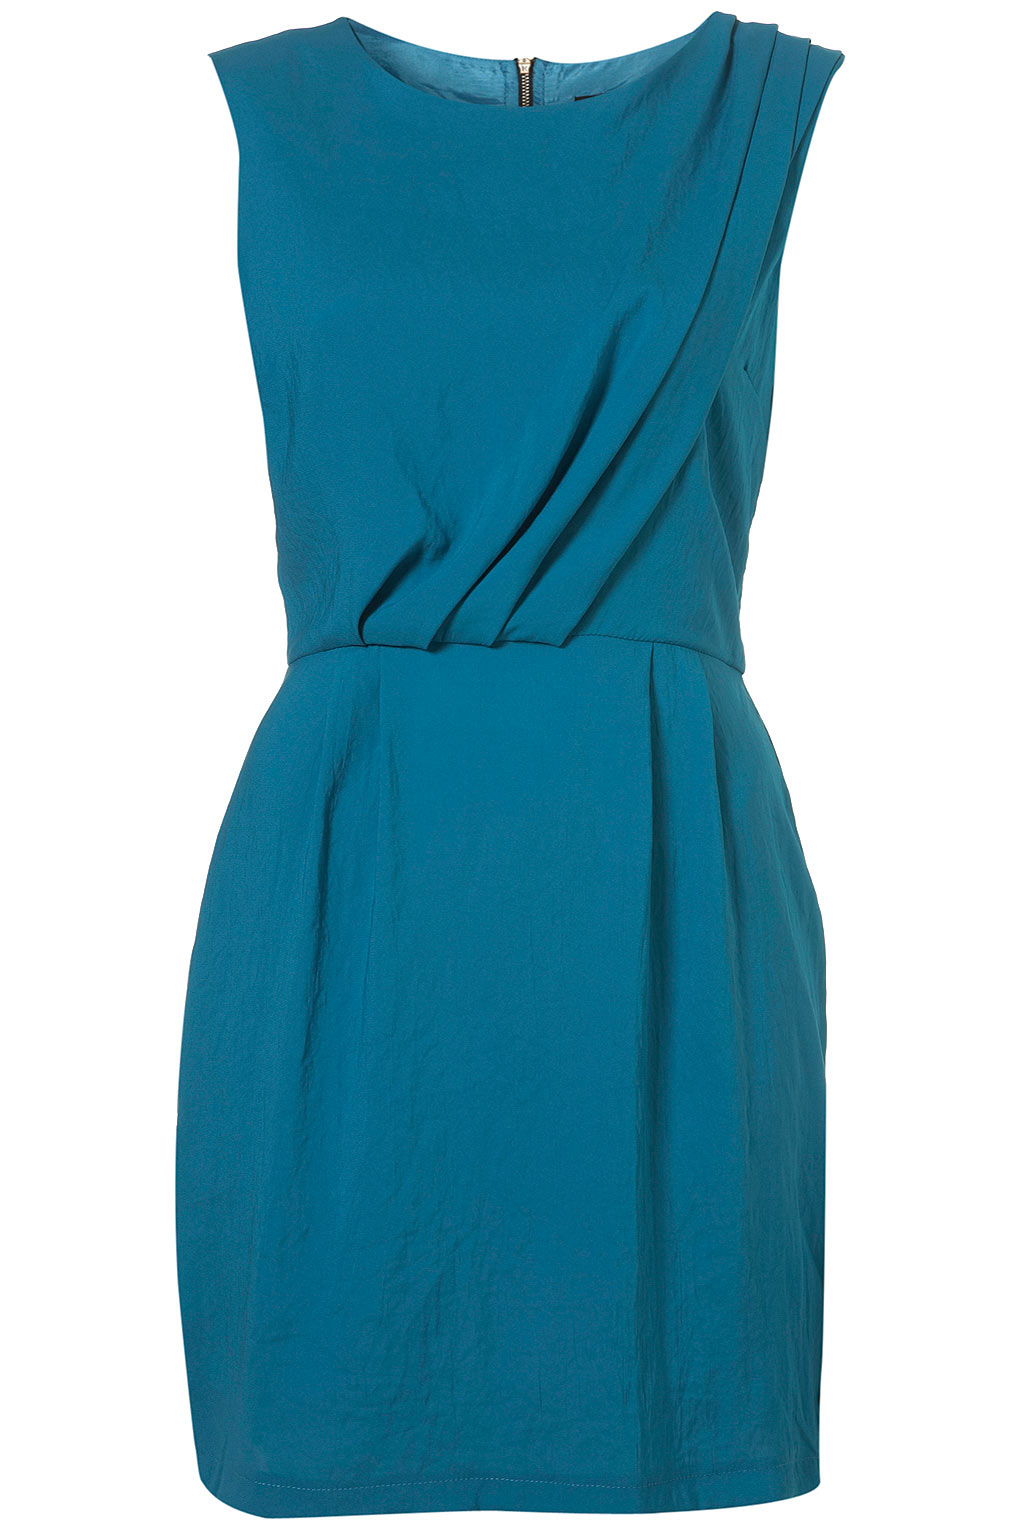 Topshop Tuck Shift Dress in Blue (teal) | Lyst